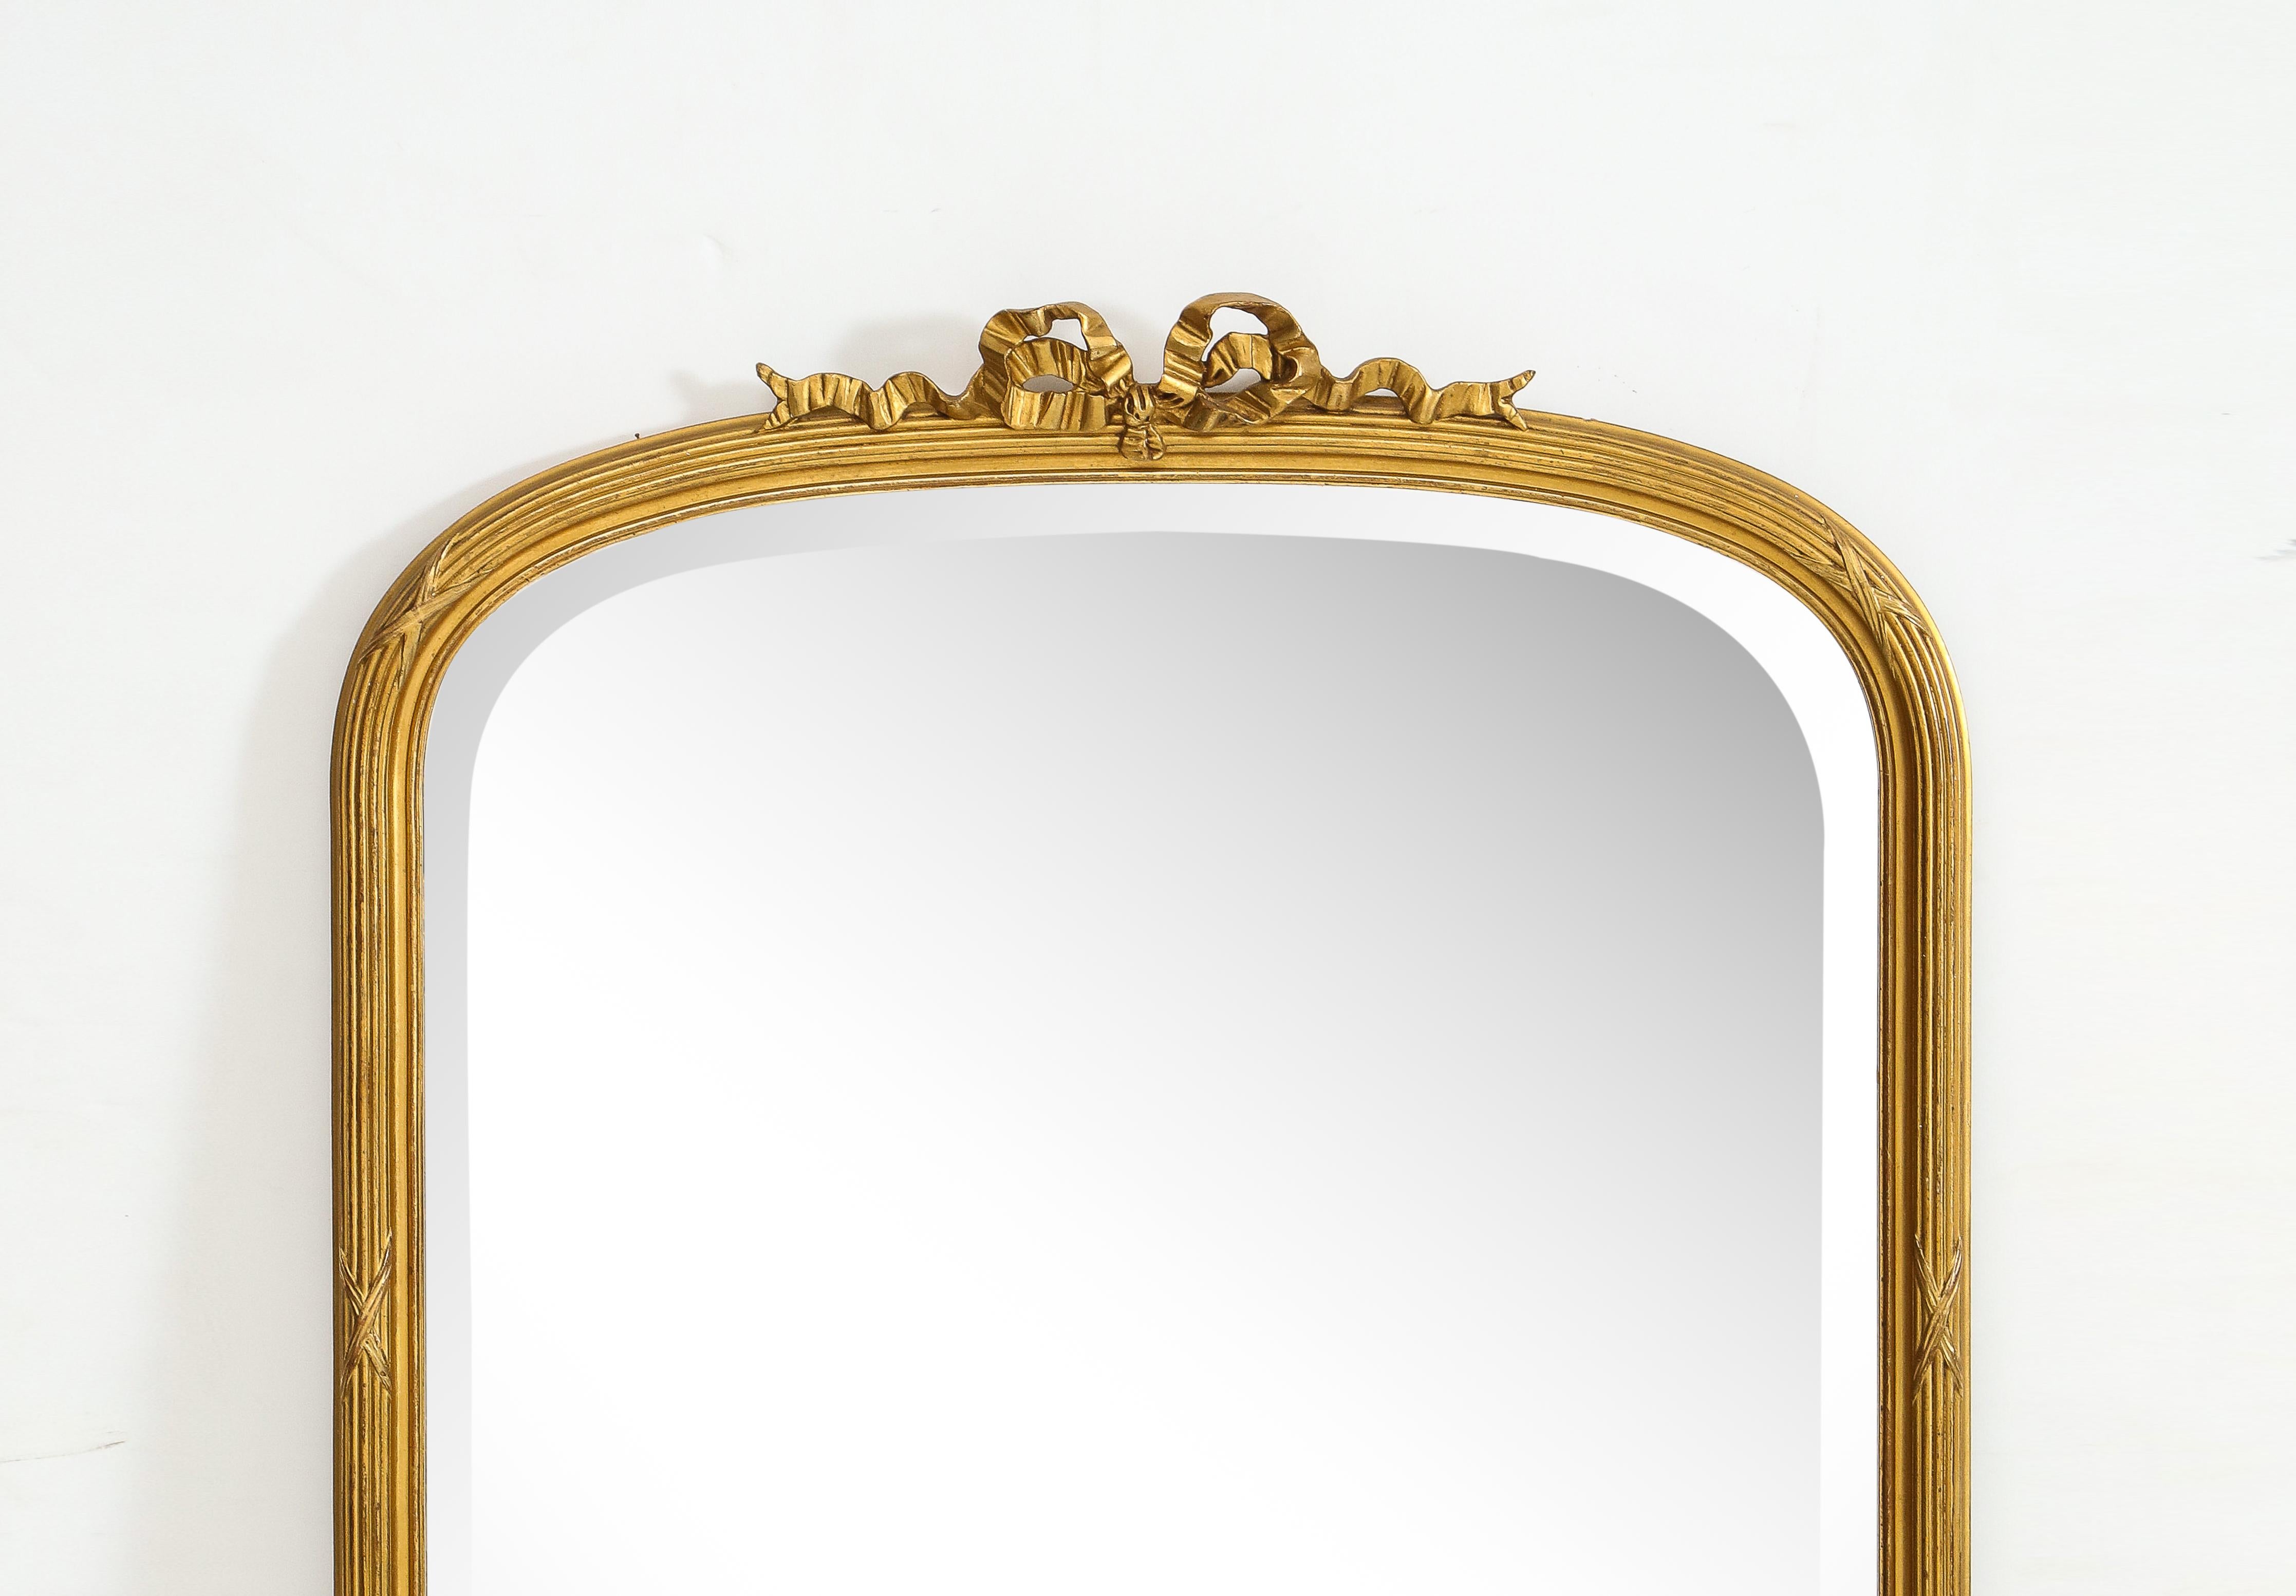 20th Century French Louis XVI style gilt and gesso over-mantel mirror. The reeded rounded frame features a pierced bow and ribbon crest at the top, with a wide beveled glass plate.